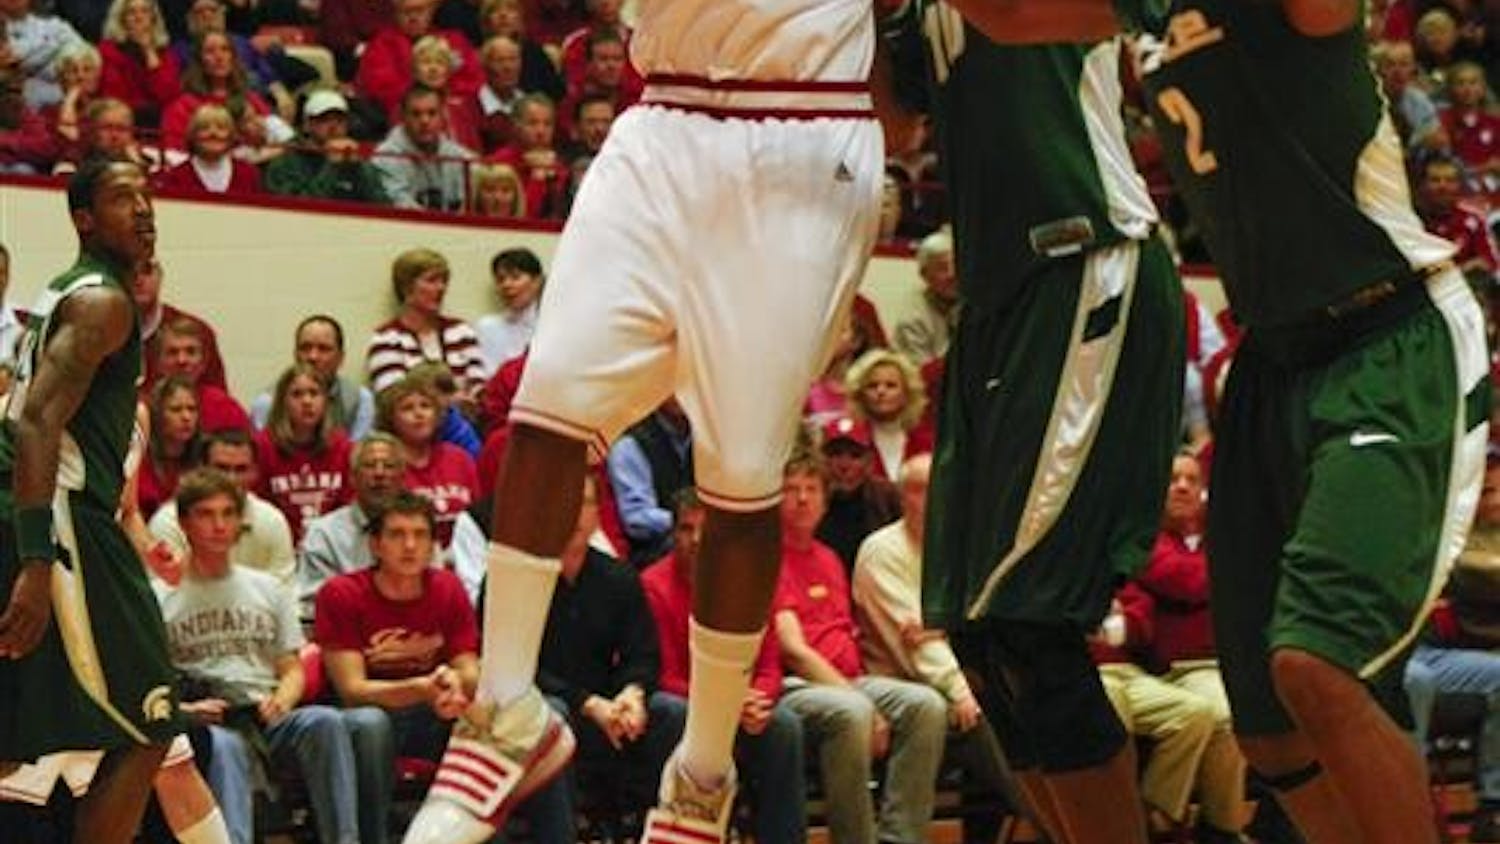 Freshman Guard/Forward Malik Story goes for a basket against a Michigan State defender Tuesday evening at Assembly Hall. The Hoosiers lost to Michigan State with a final score of 59-64.